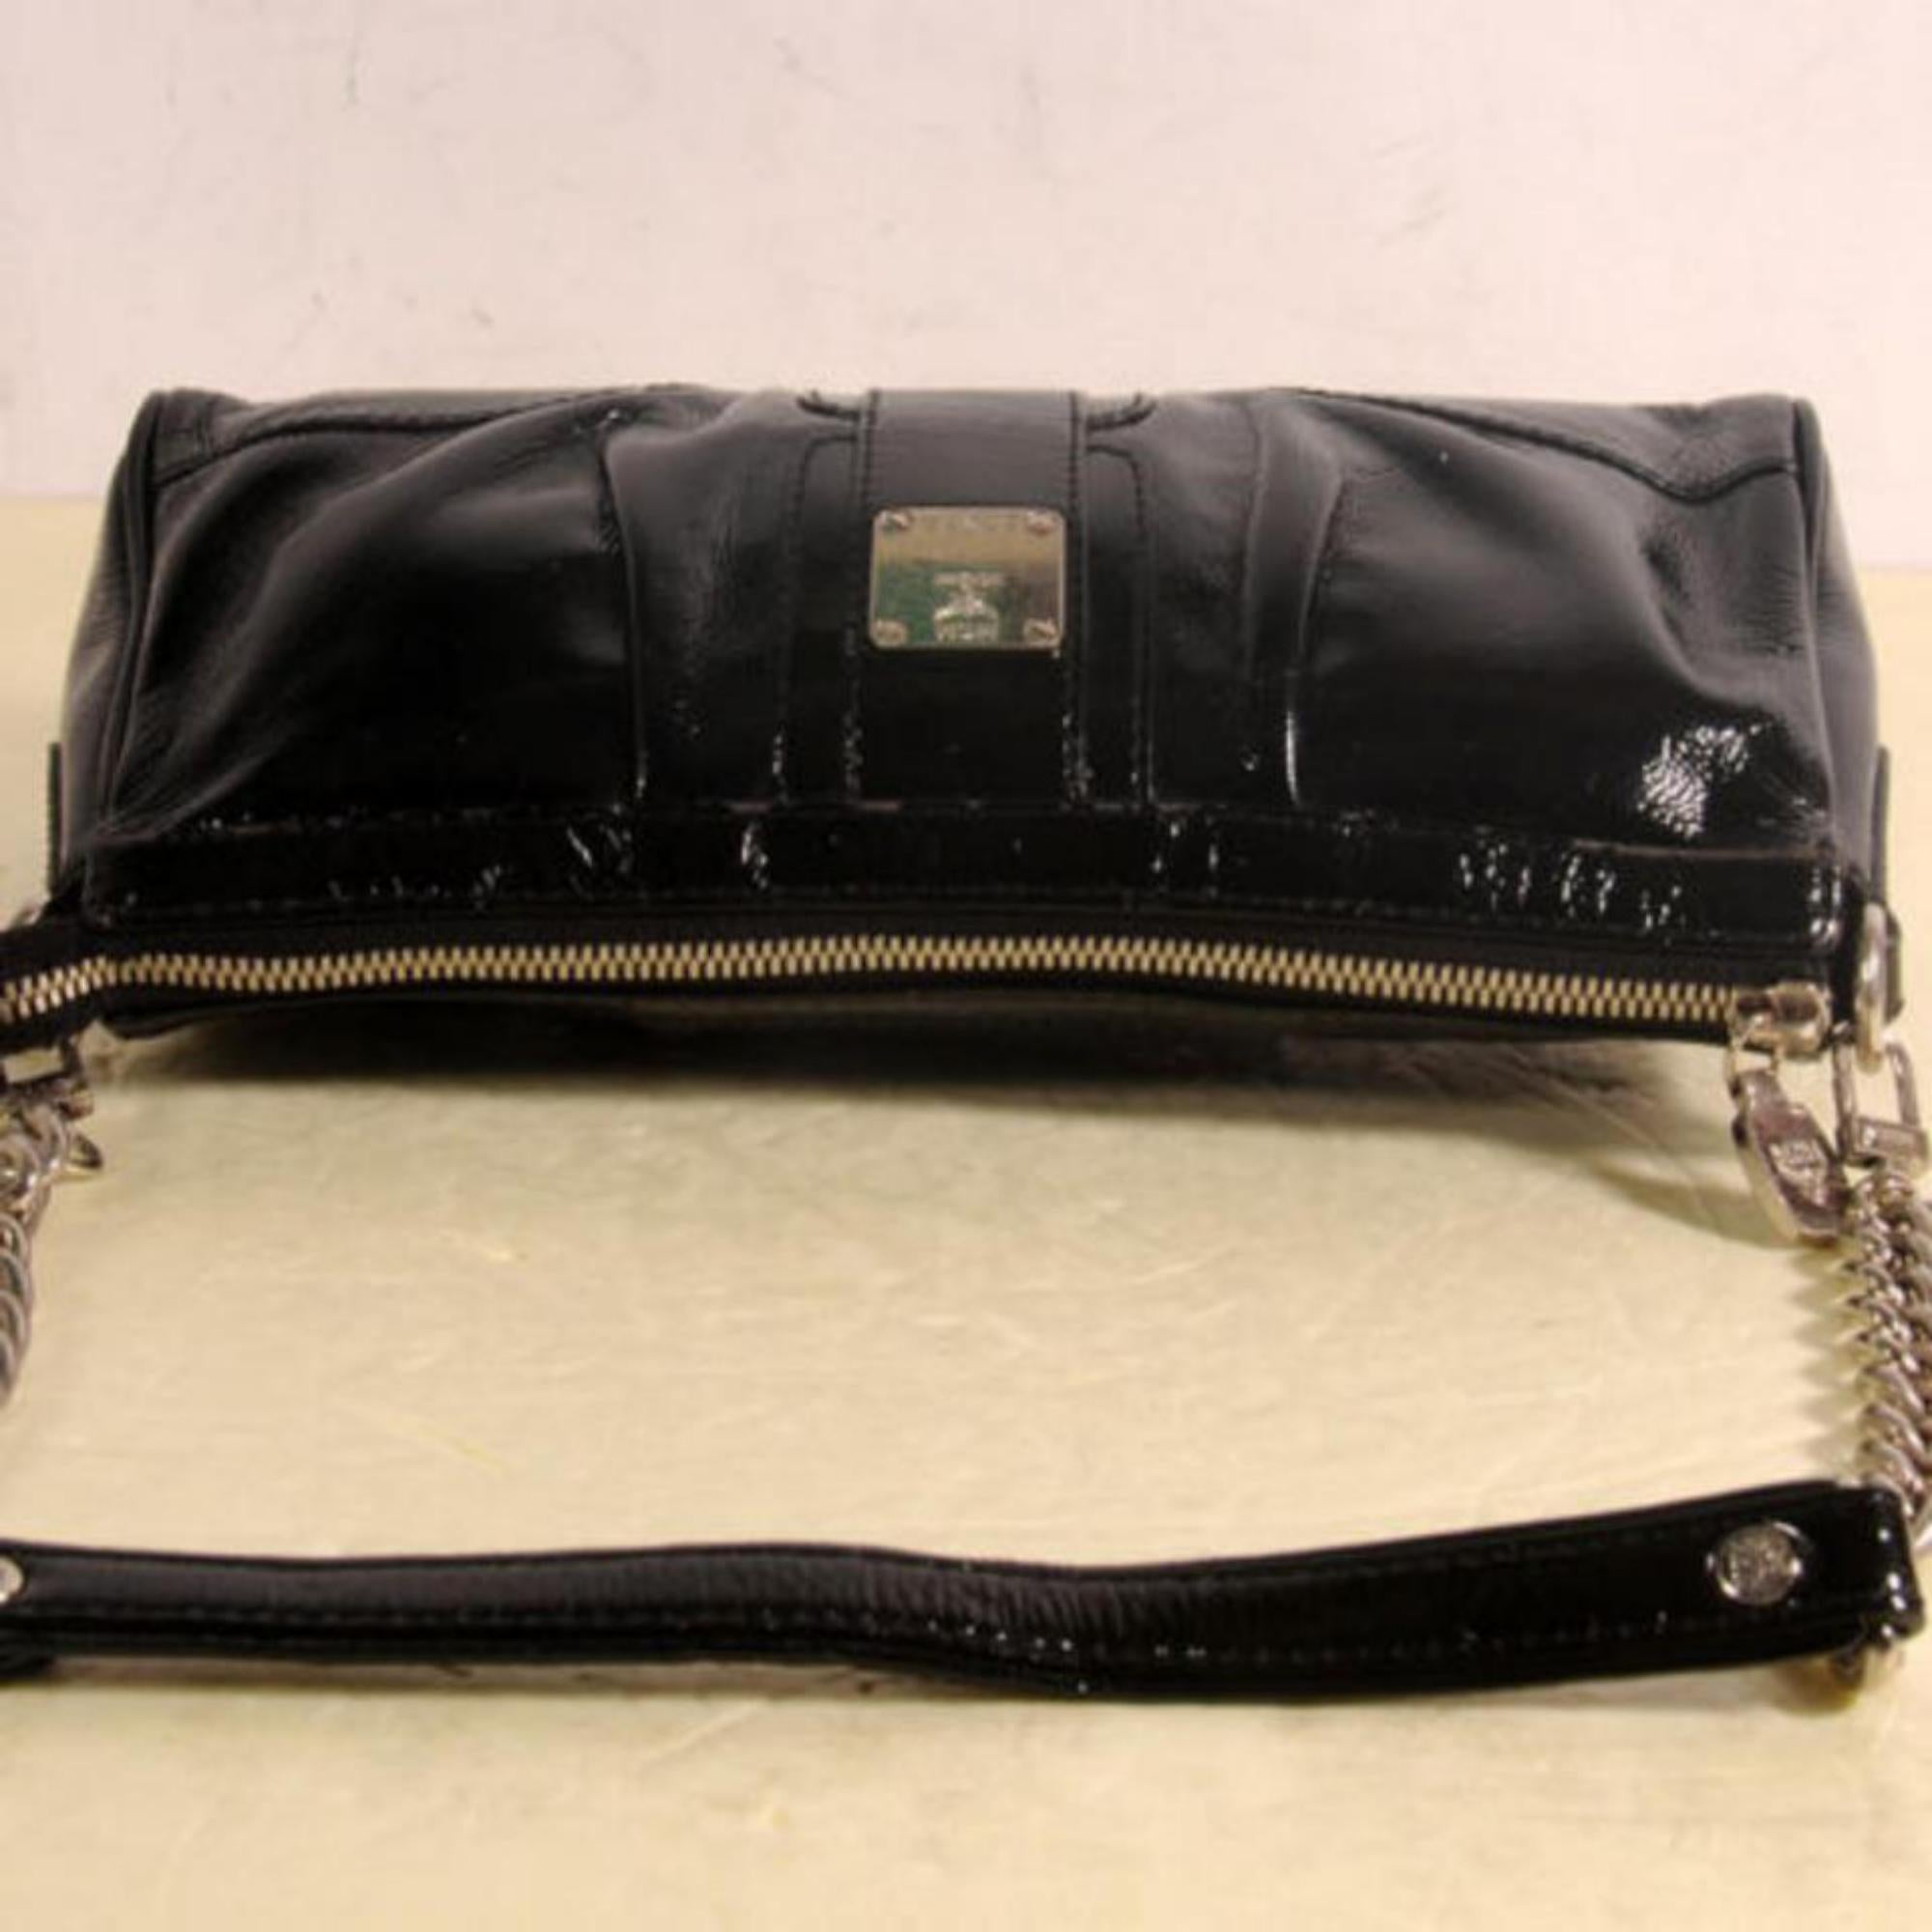 VERY GOOD VINTAGE CONDITION
(7/10 or B)
Includes Dust Bag
This item does not come with any extra accessories.
Please review photos for more details.
Color appearance may vary depending on your monitor settings.
SKU :869163